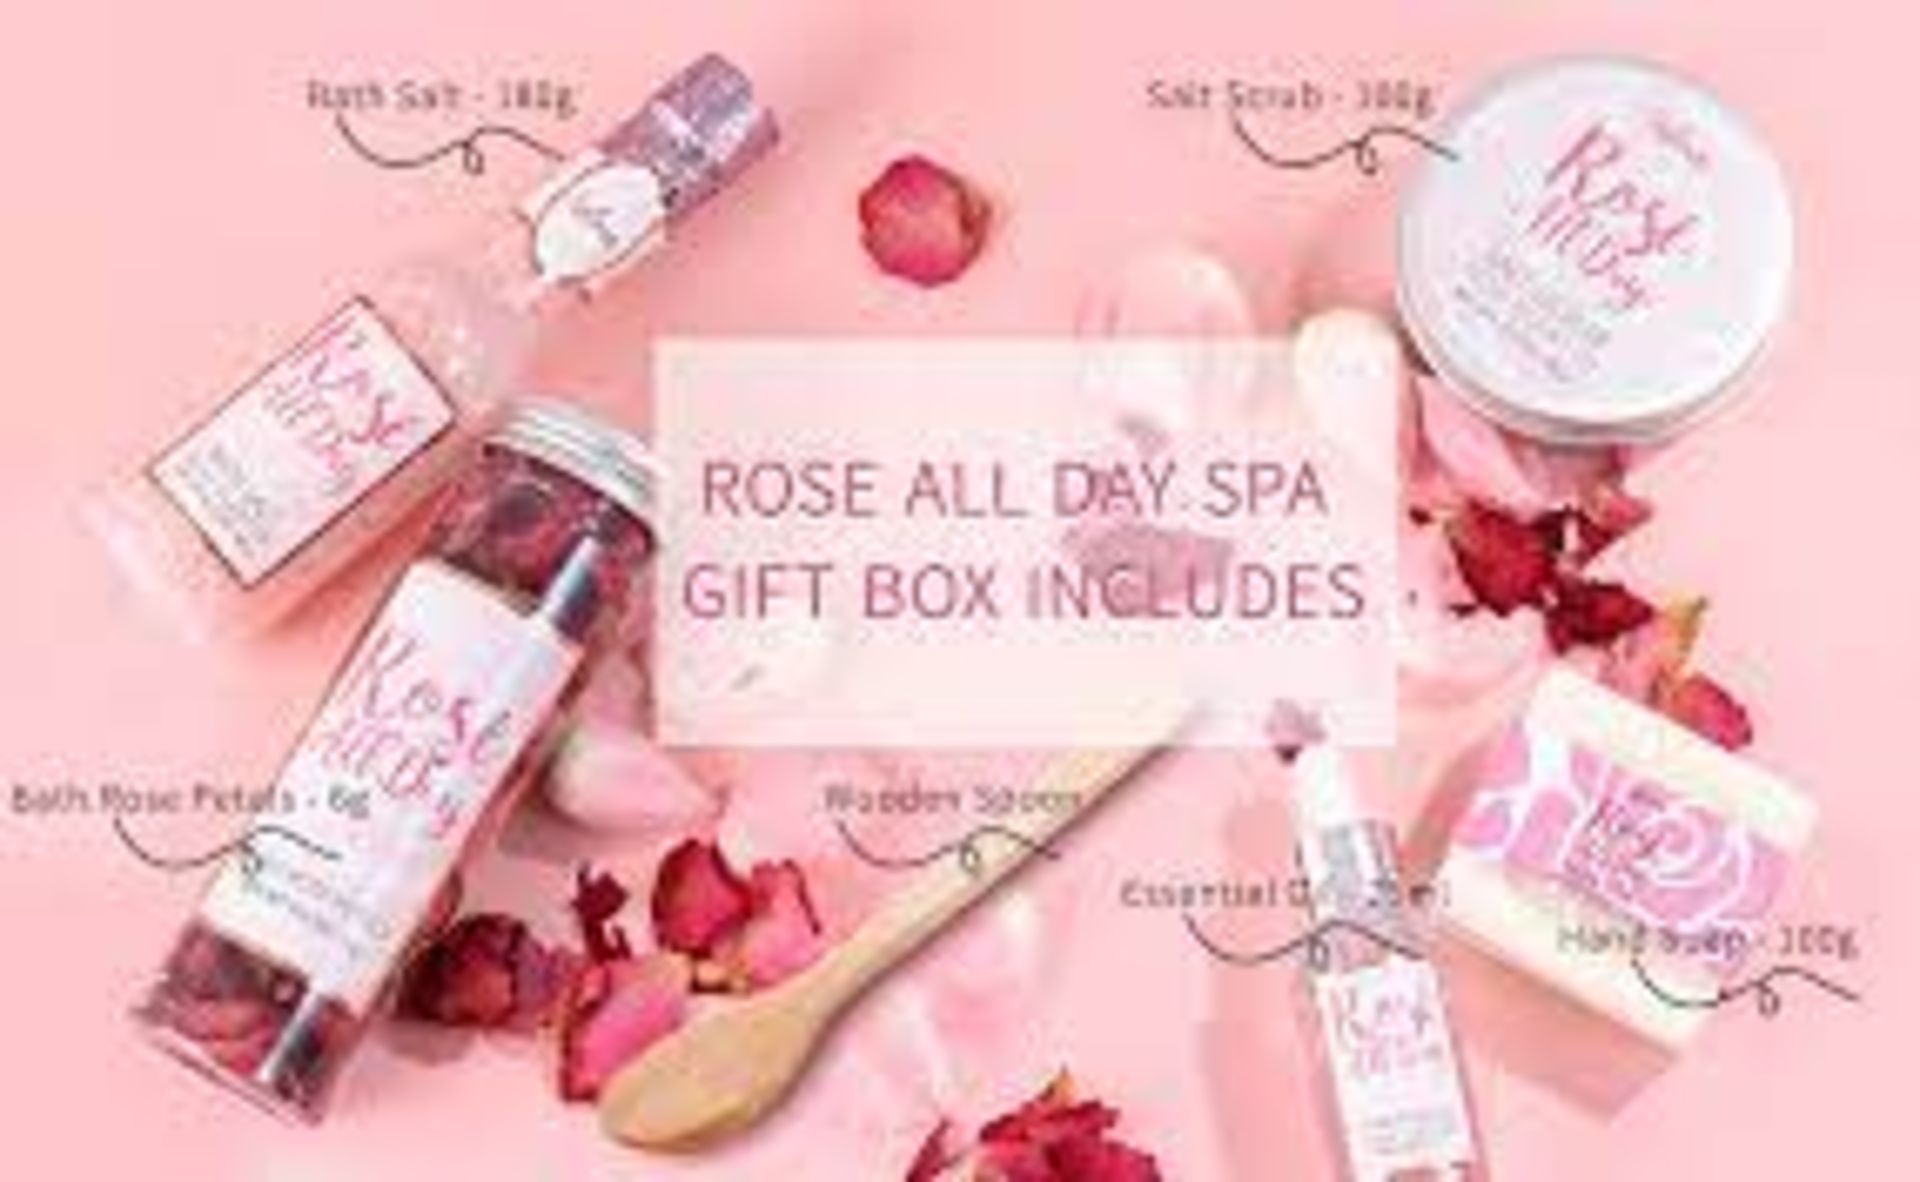 New Packaged Rose All Day Bath Gift Box. (Sku:Bff-Bp-11) Best Gift Set For Women - Our Spa - Image 2 of 2